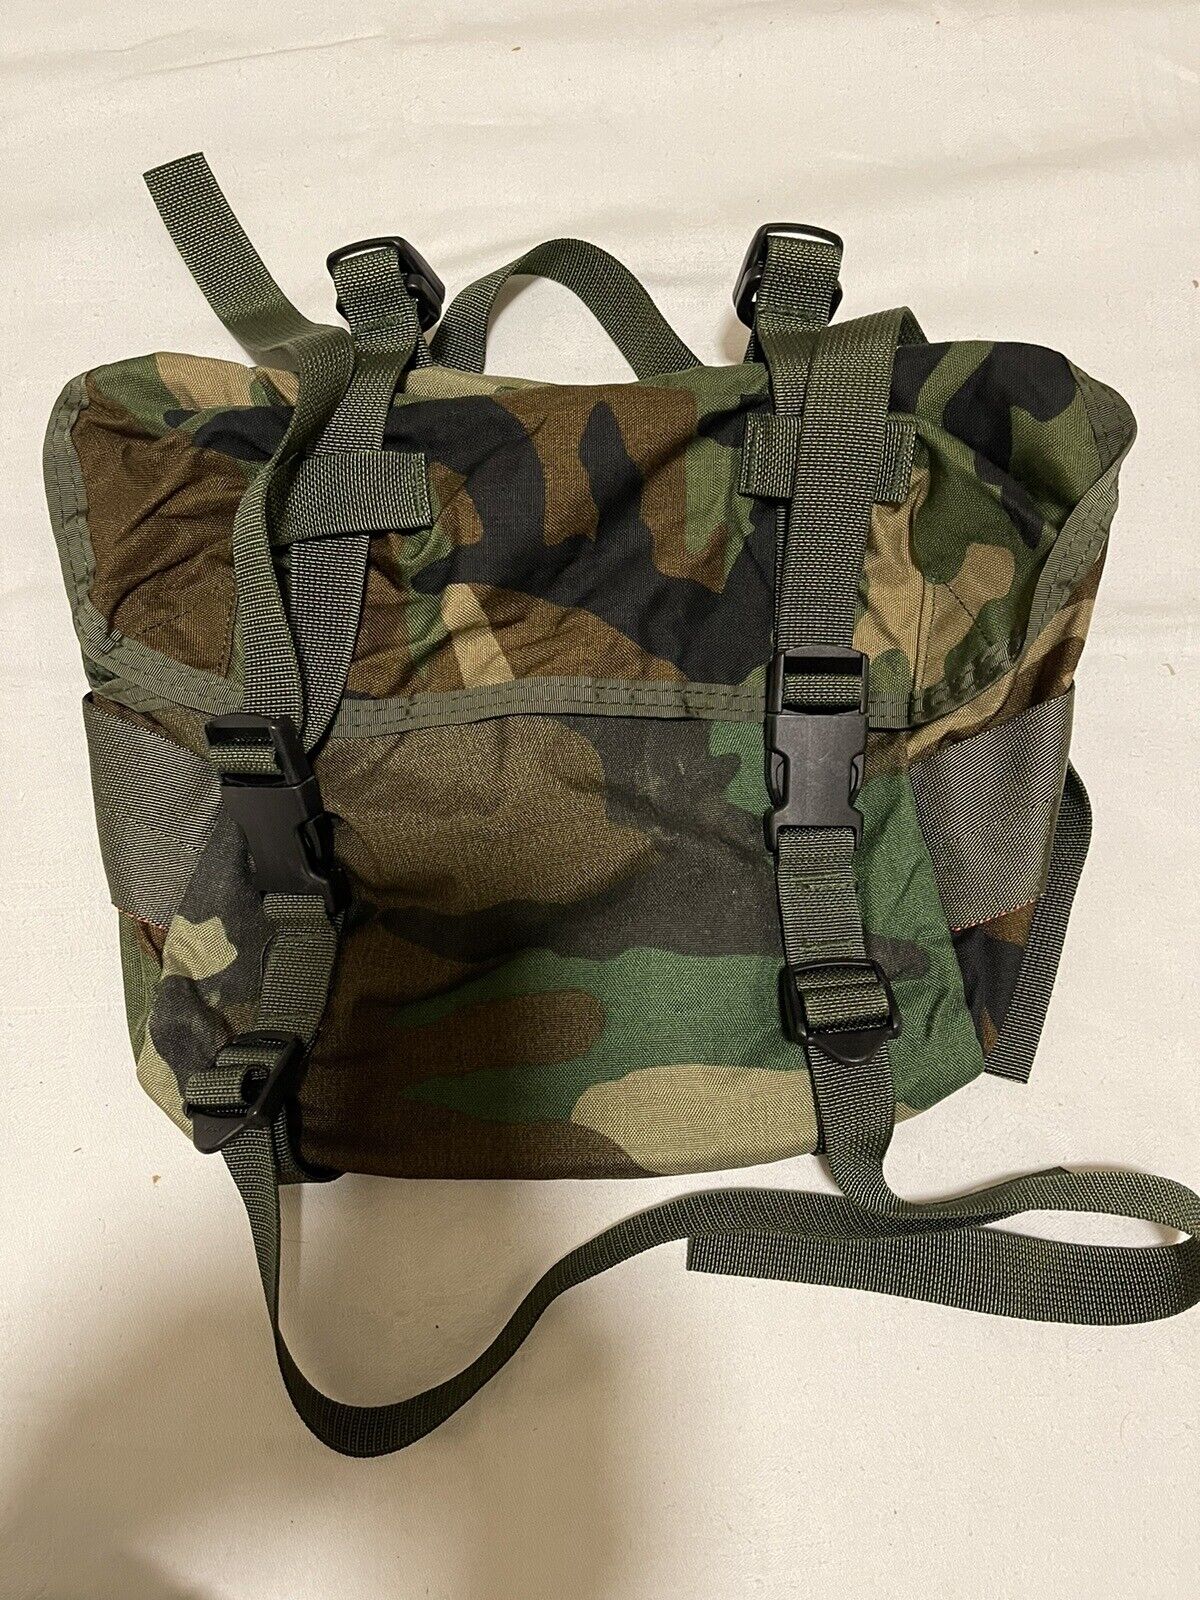 USGI 3 Day Field Training Butt Pack M81 Woodland Camouflage ALICE MOLLE